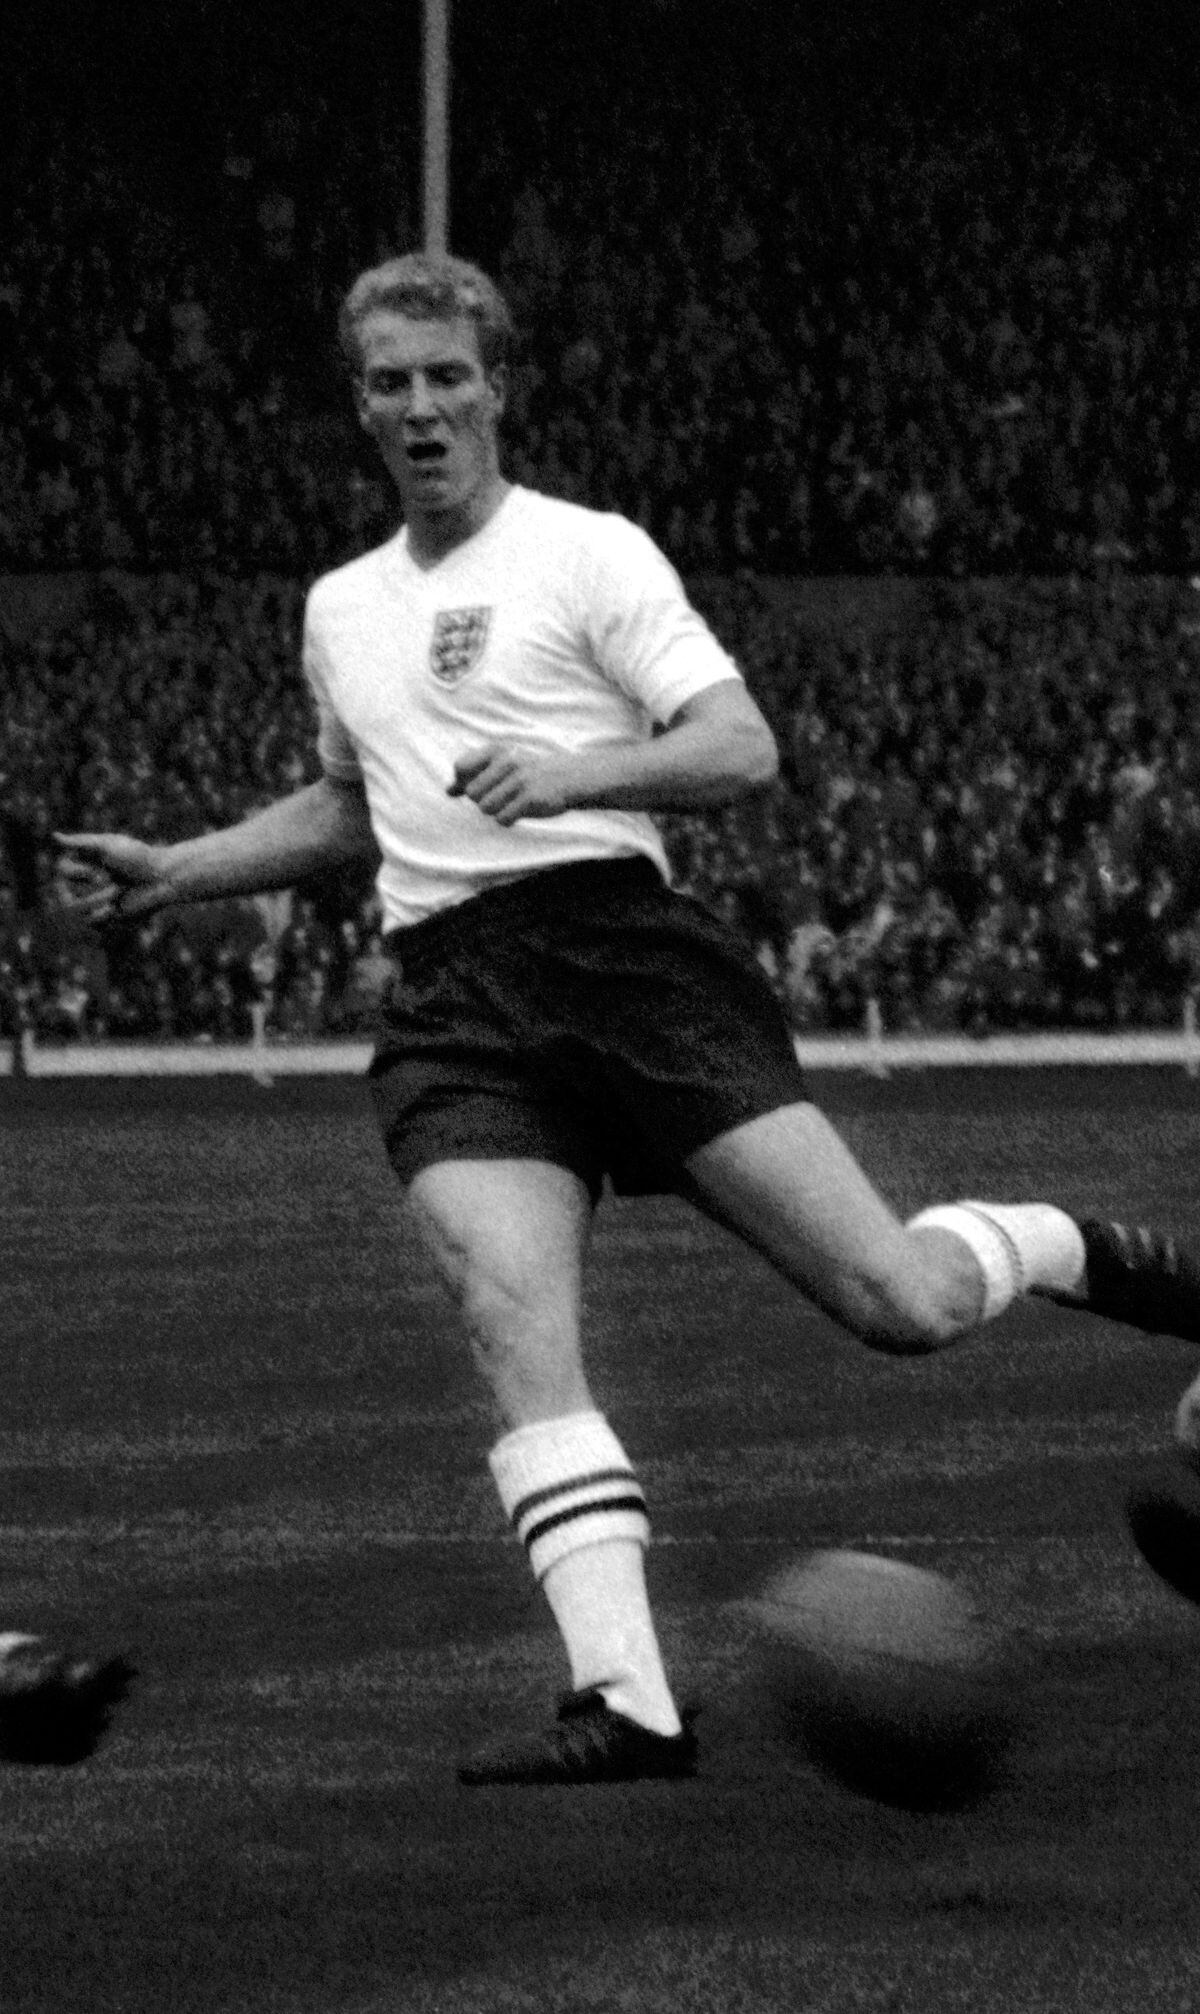 England International Ron Flowers of Wolverhampton Wanderers in action.